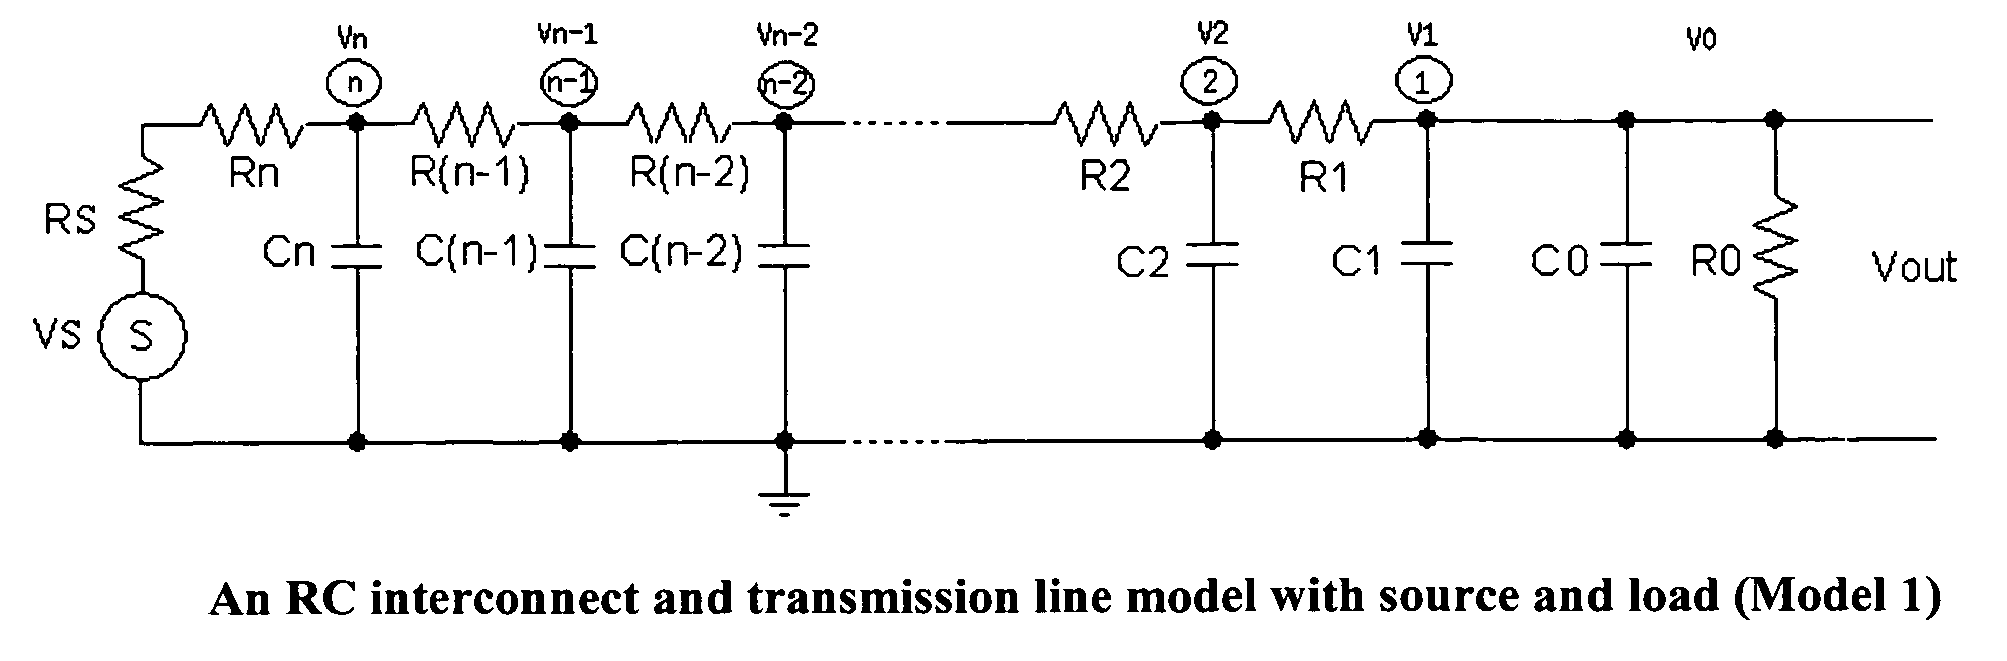 Methods to generate state space models by closed forms and transfer functions by recursive algorithms for RC interconnect and transmission line and their model reduction and simulations